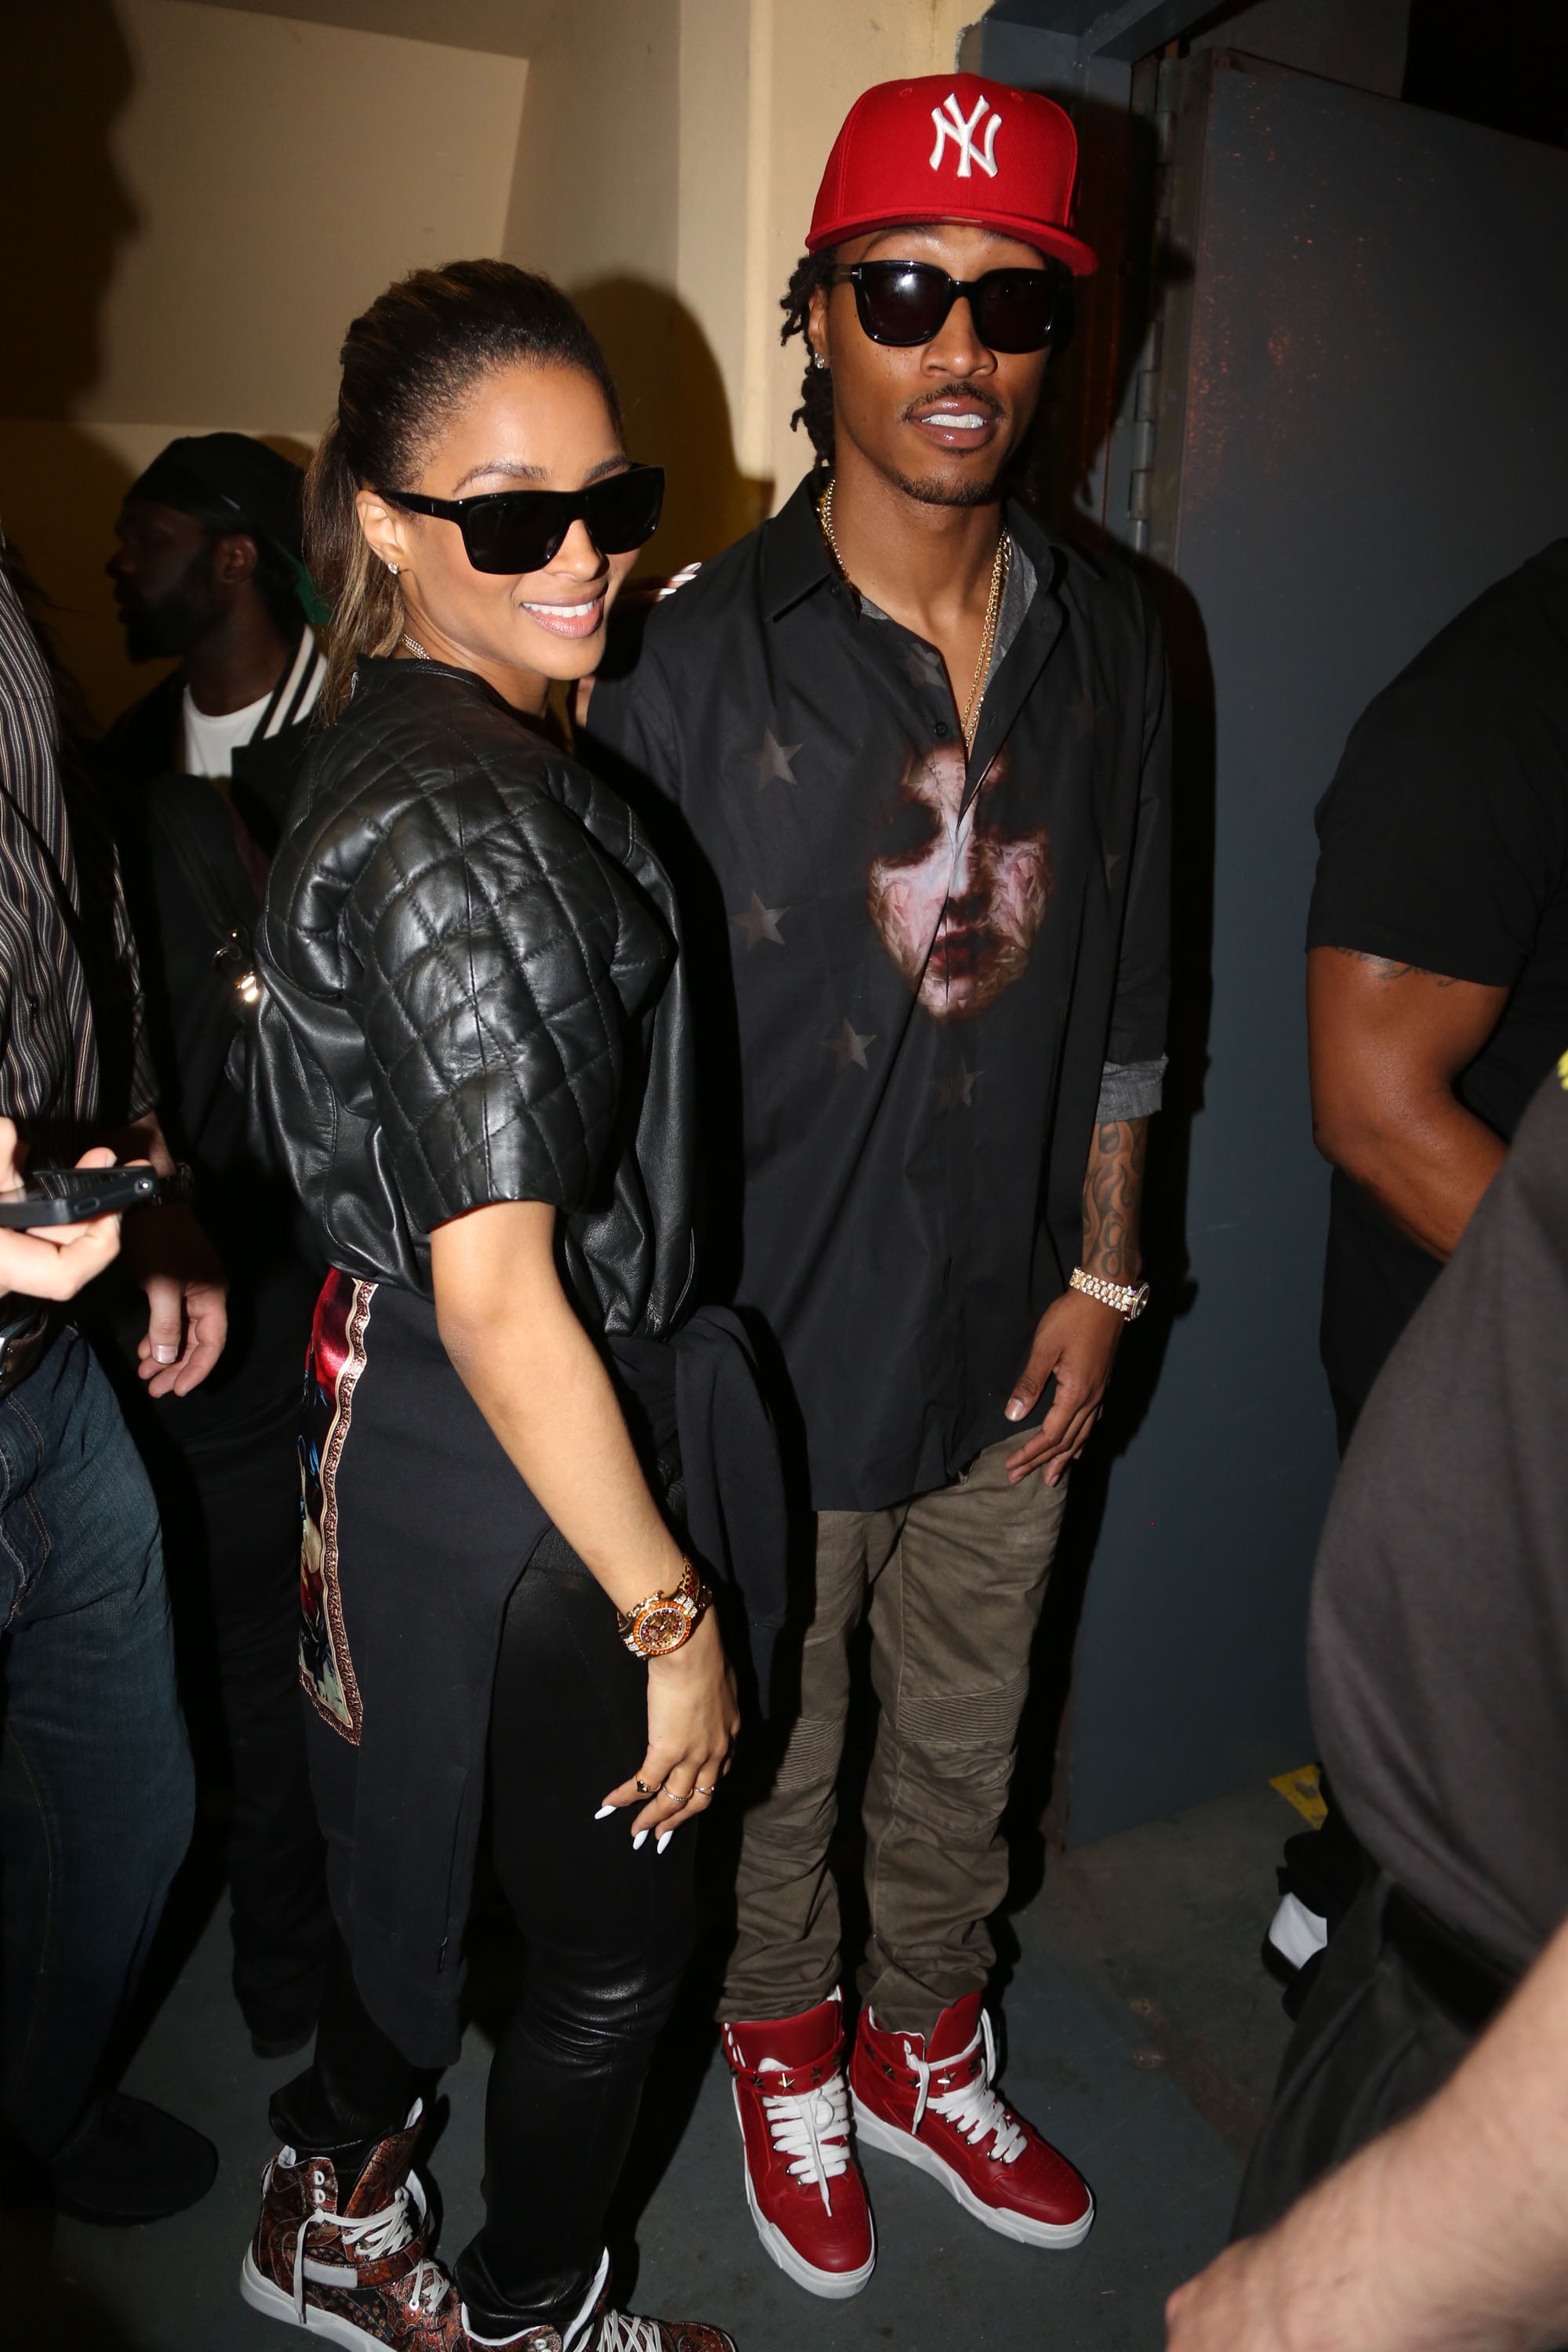 7 Reasons We're Rooting for Ciara and Future's Love